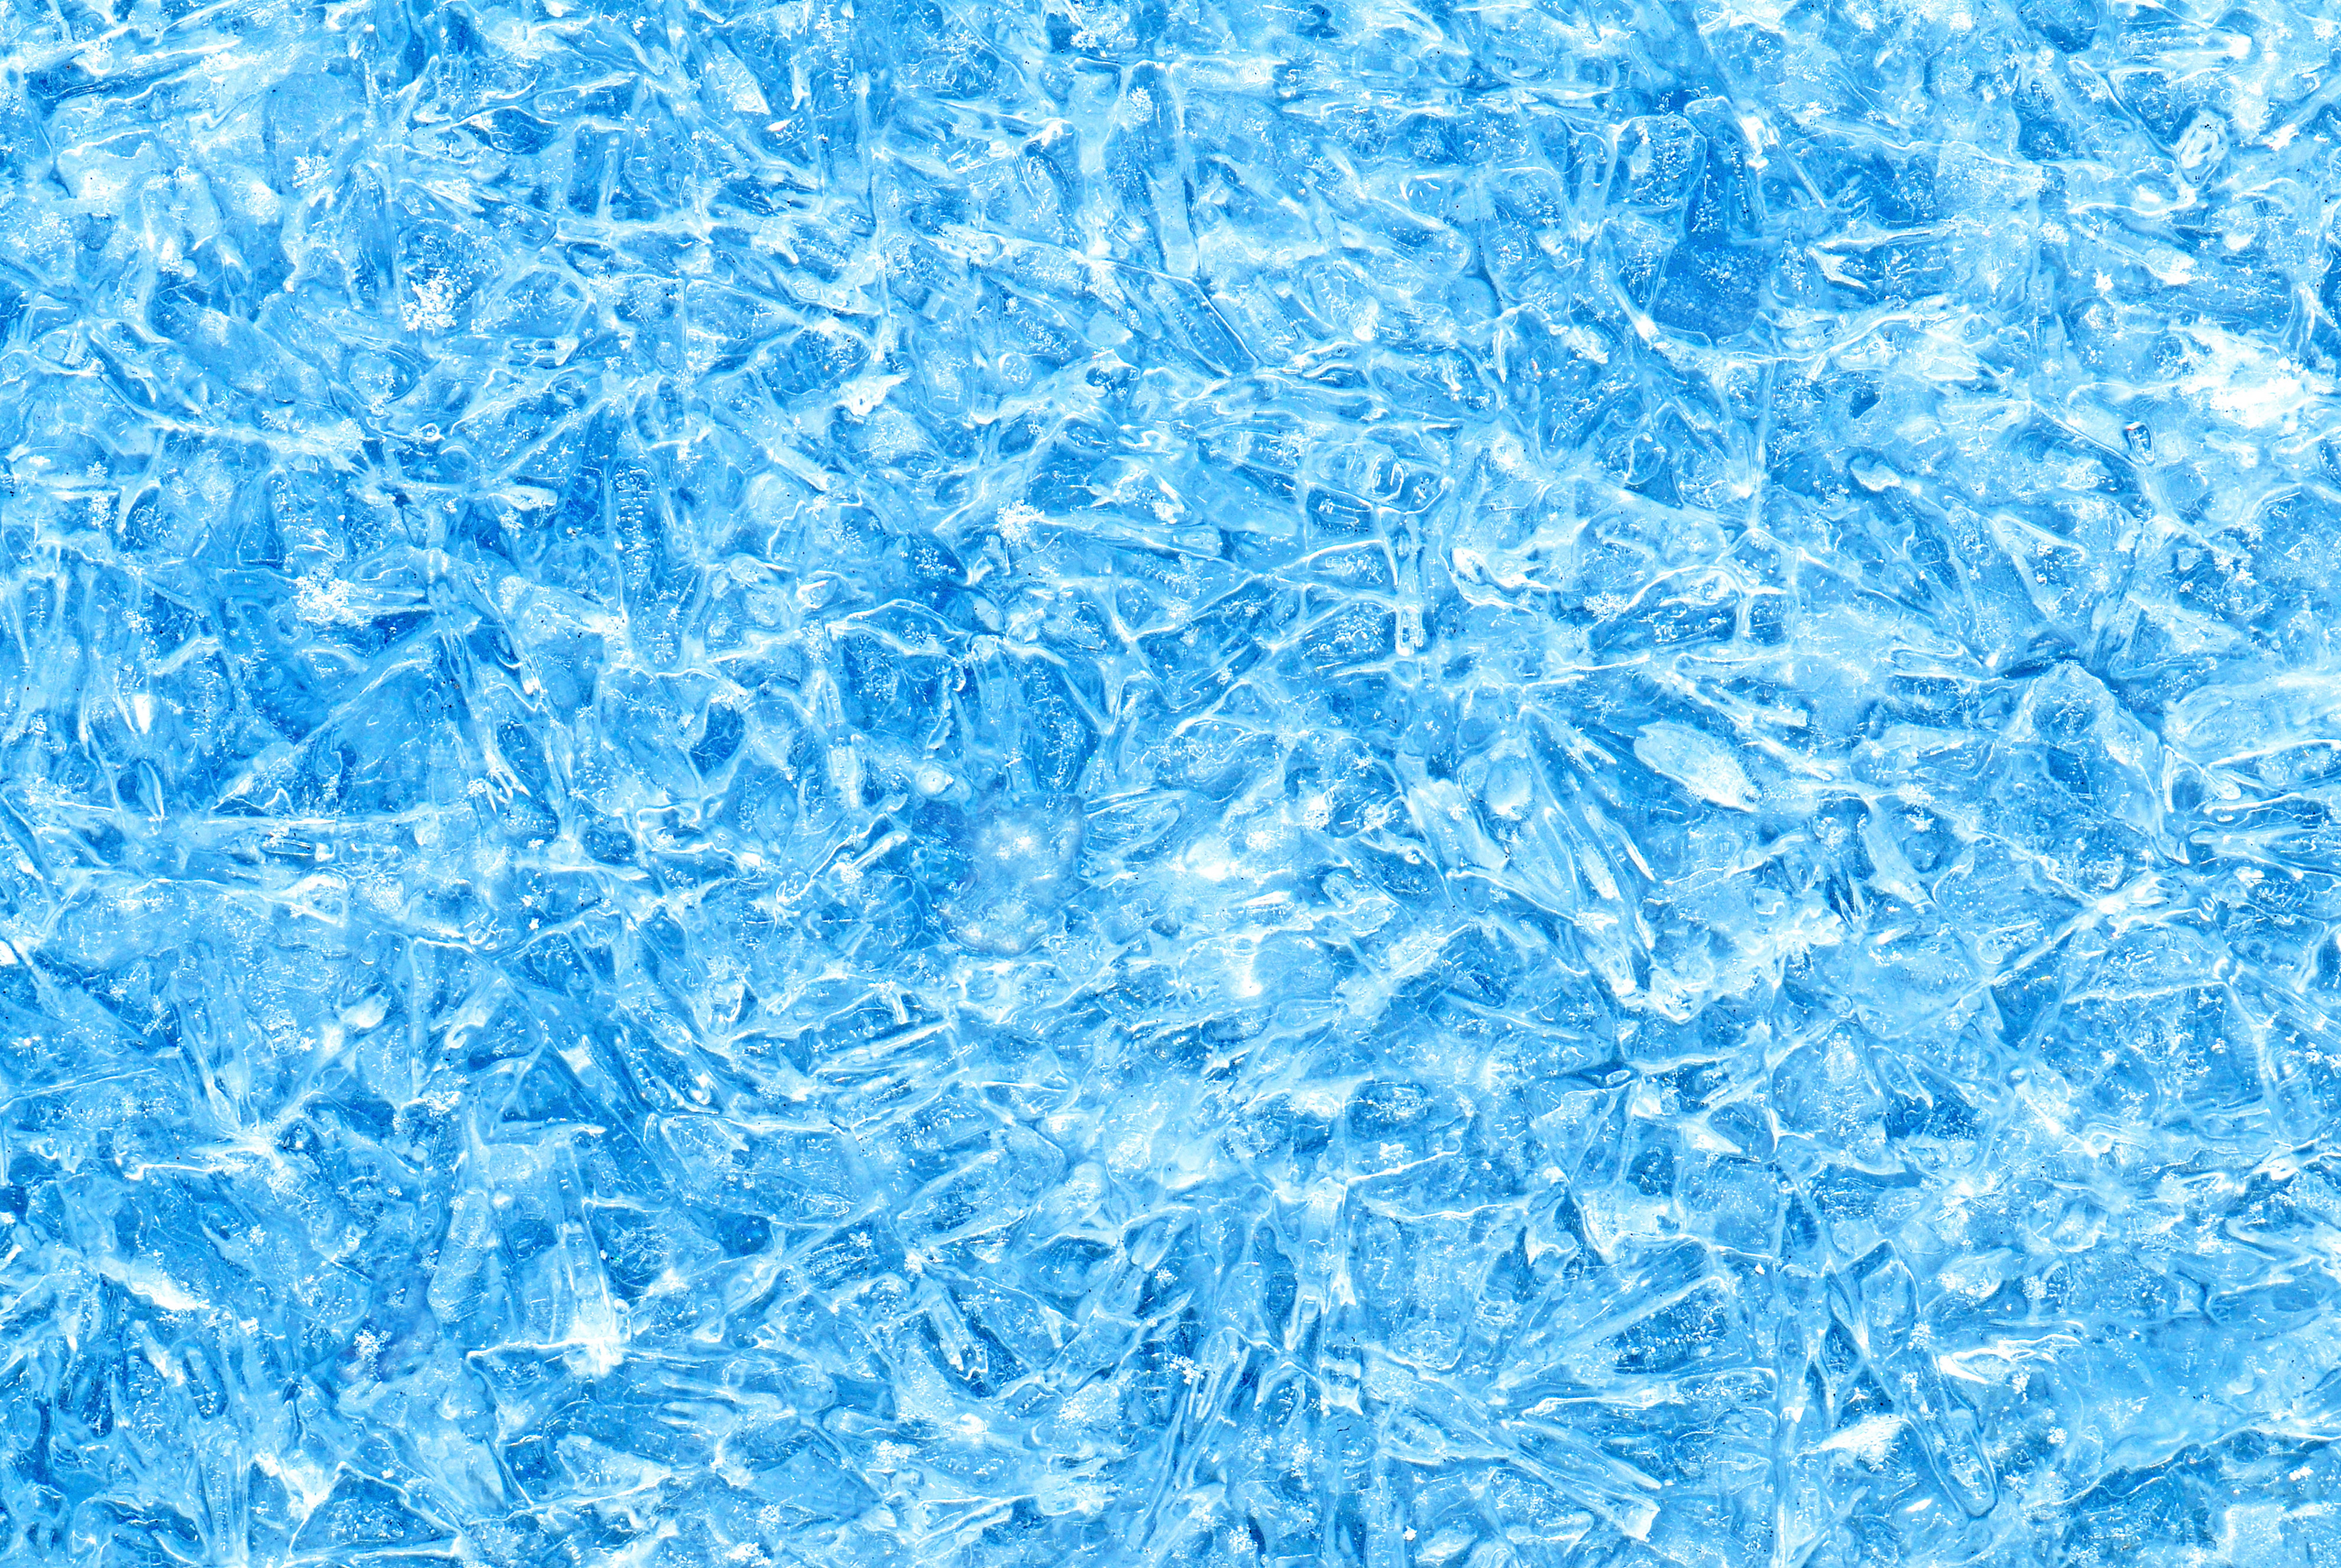 Images of Ice | 3960x2653